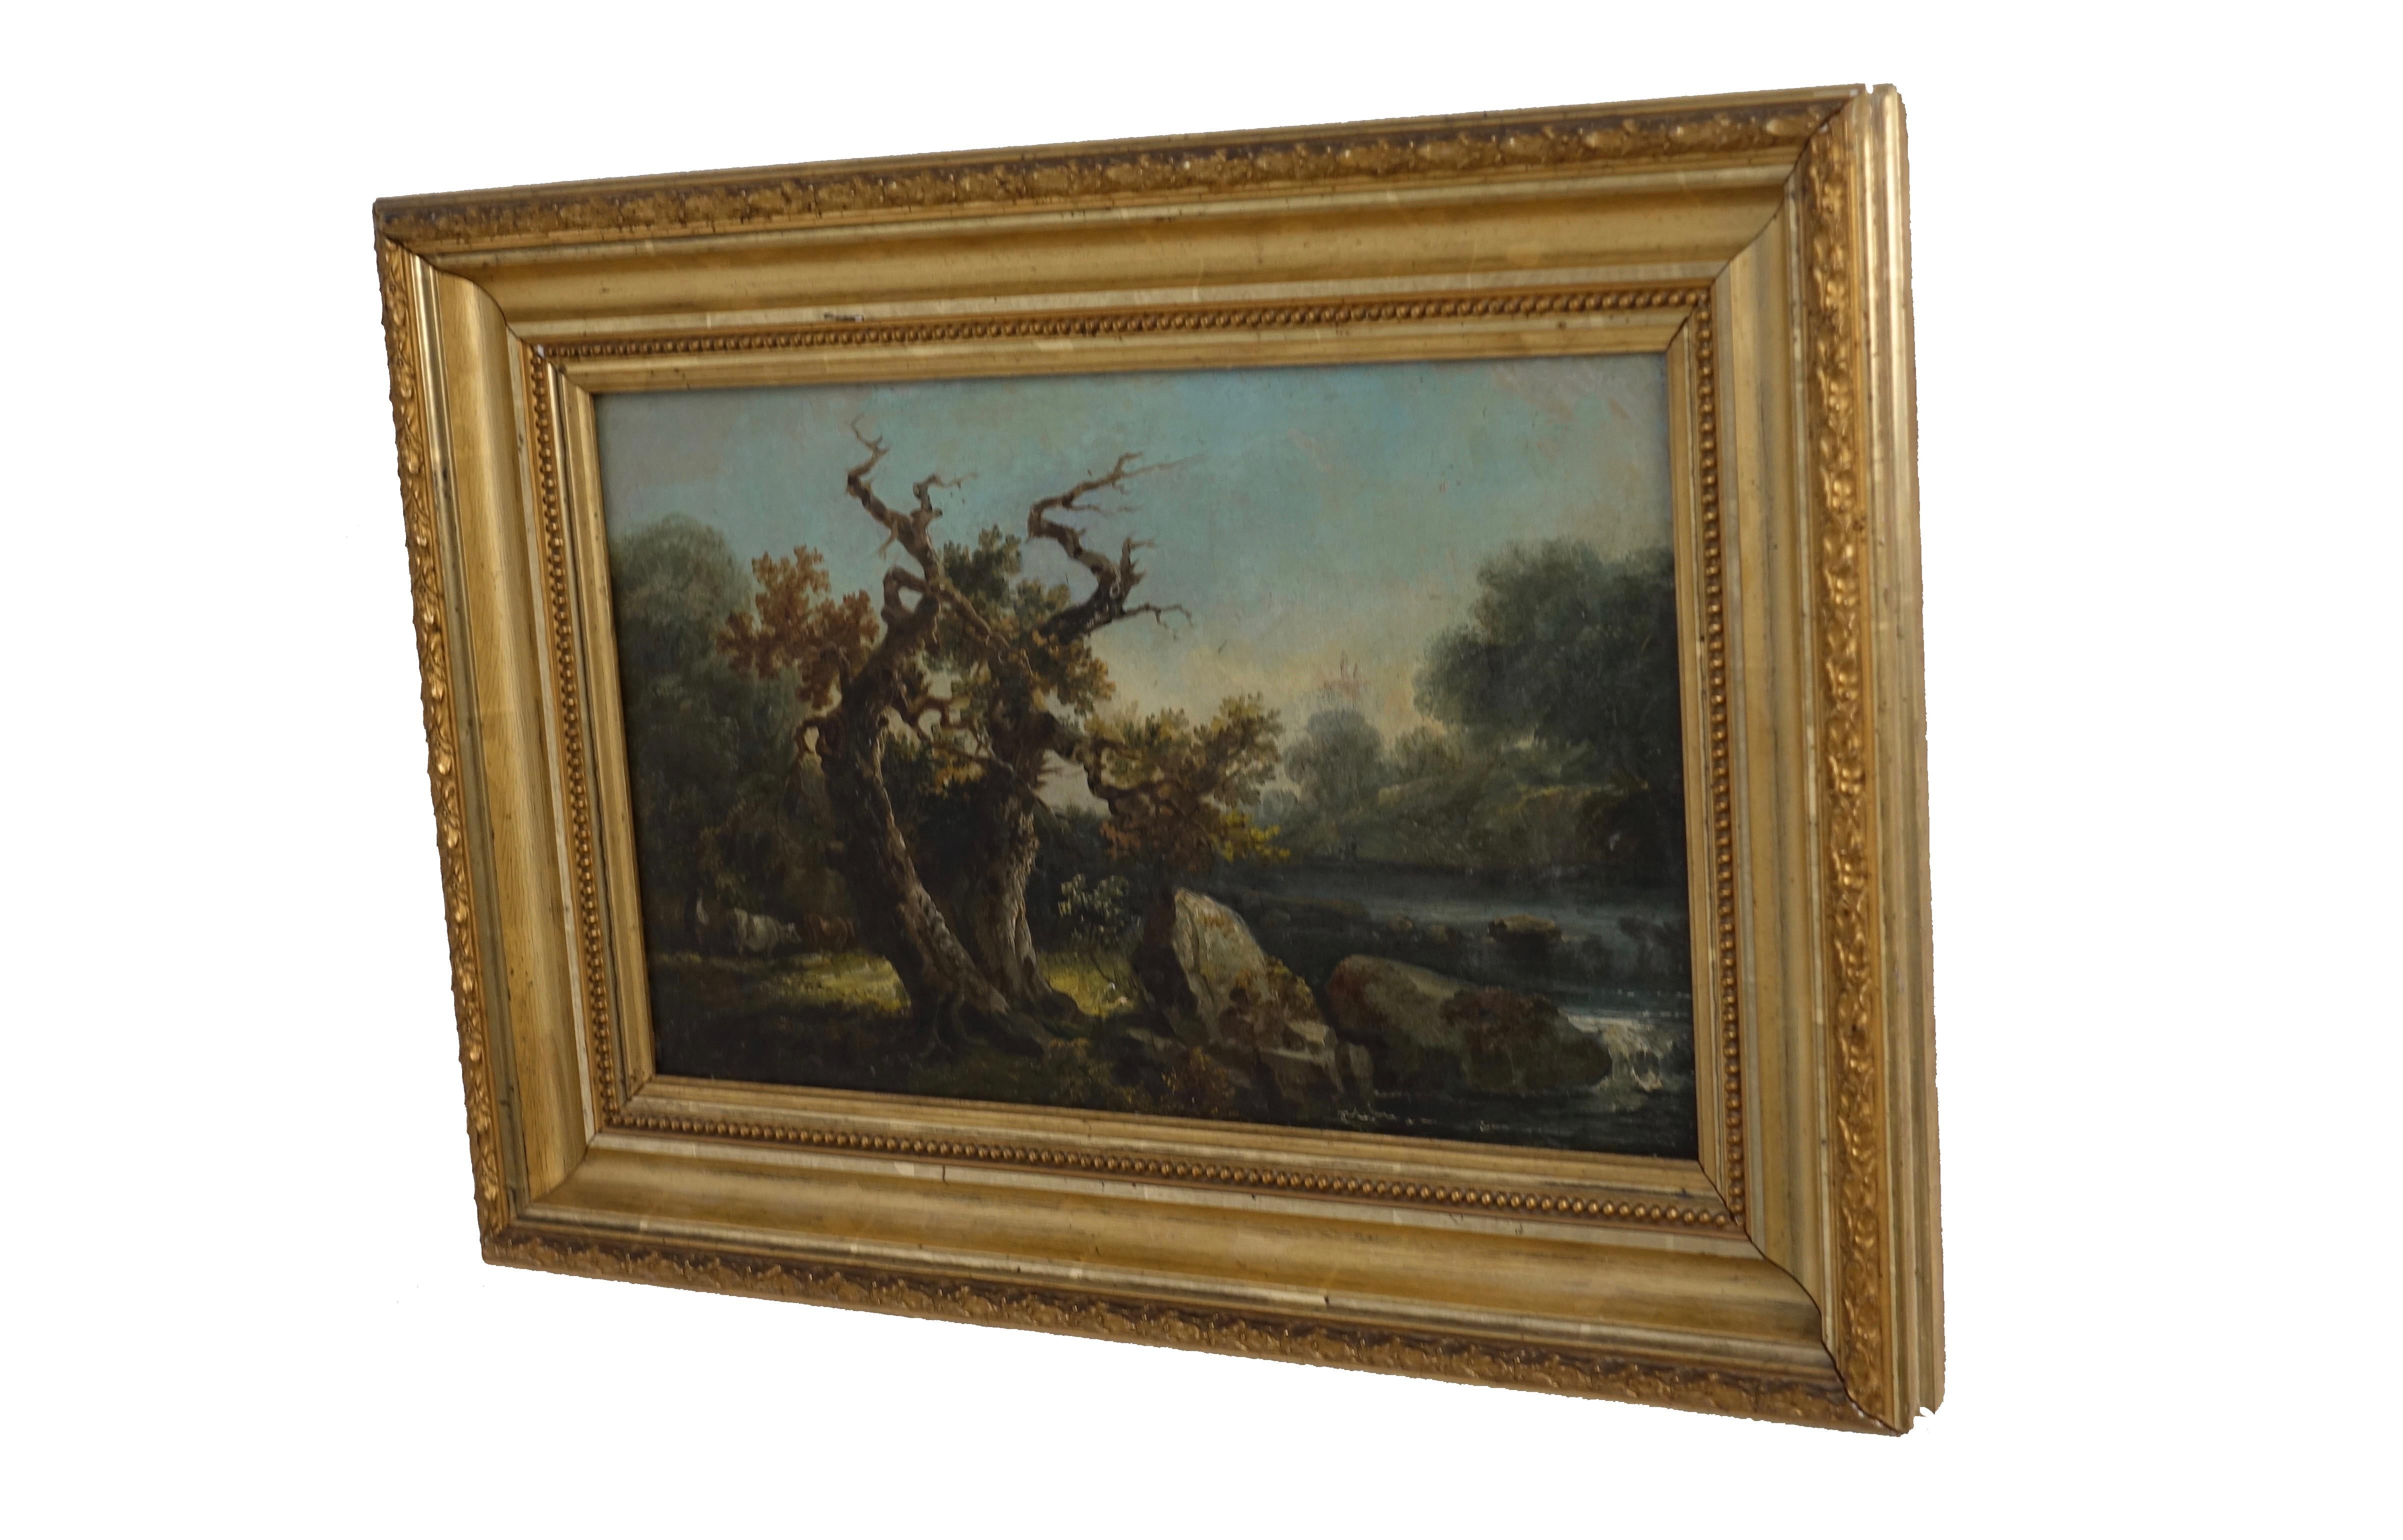 A bucolic landscape painting of cows grazing by a stream. Oil on canvas, unsigned, in giltwood frame. England, 19th century.